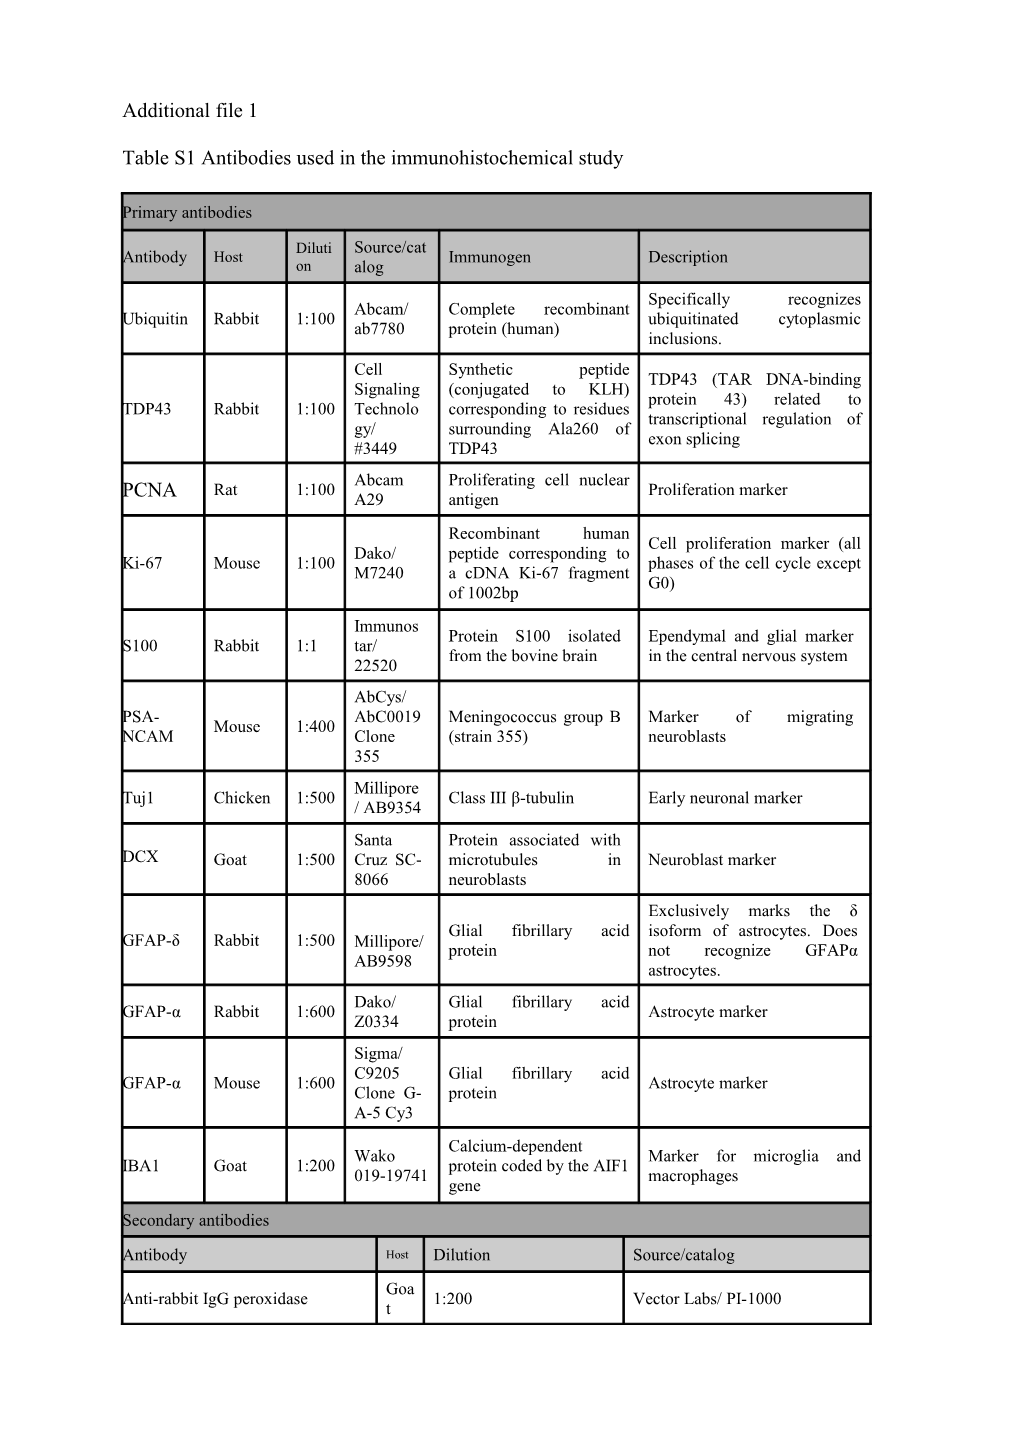 Table S1 Antibodies Used in the Immunohistochemical Study